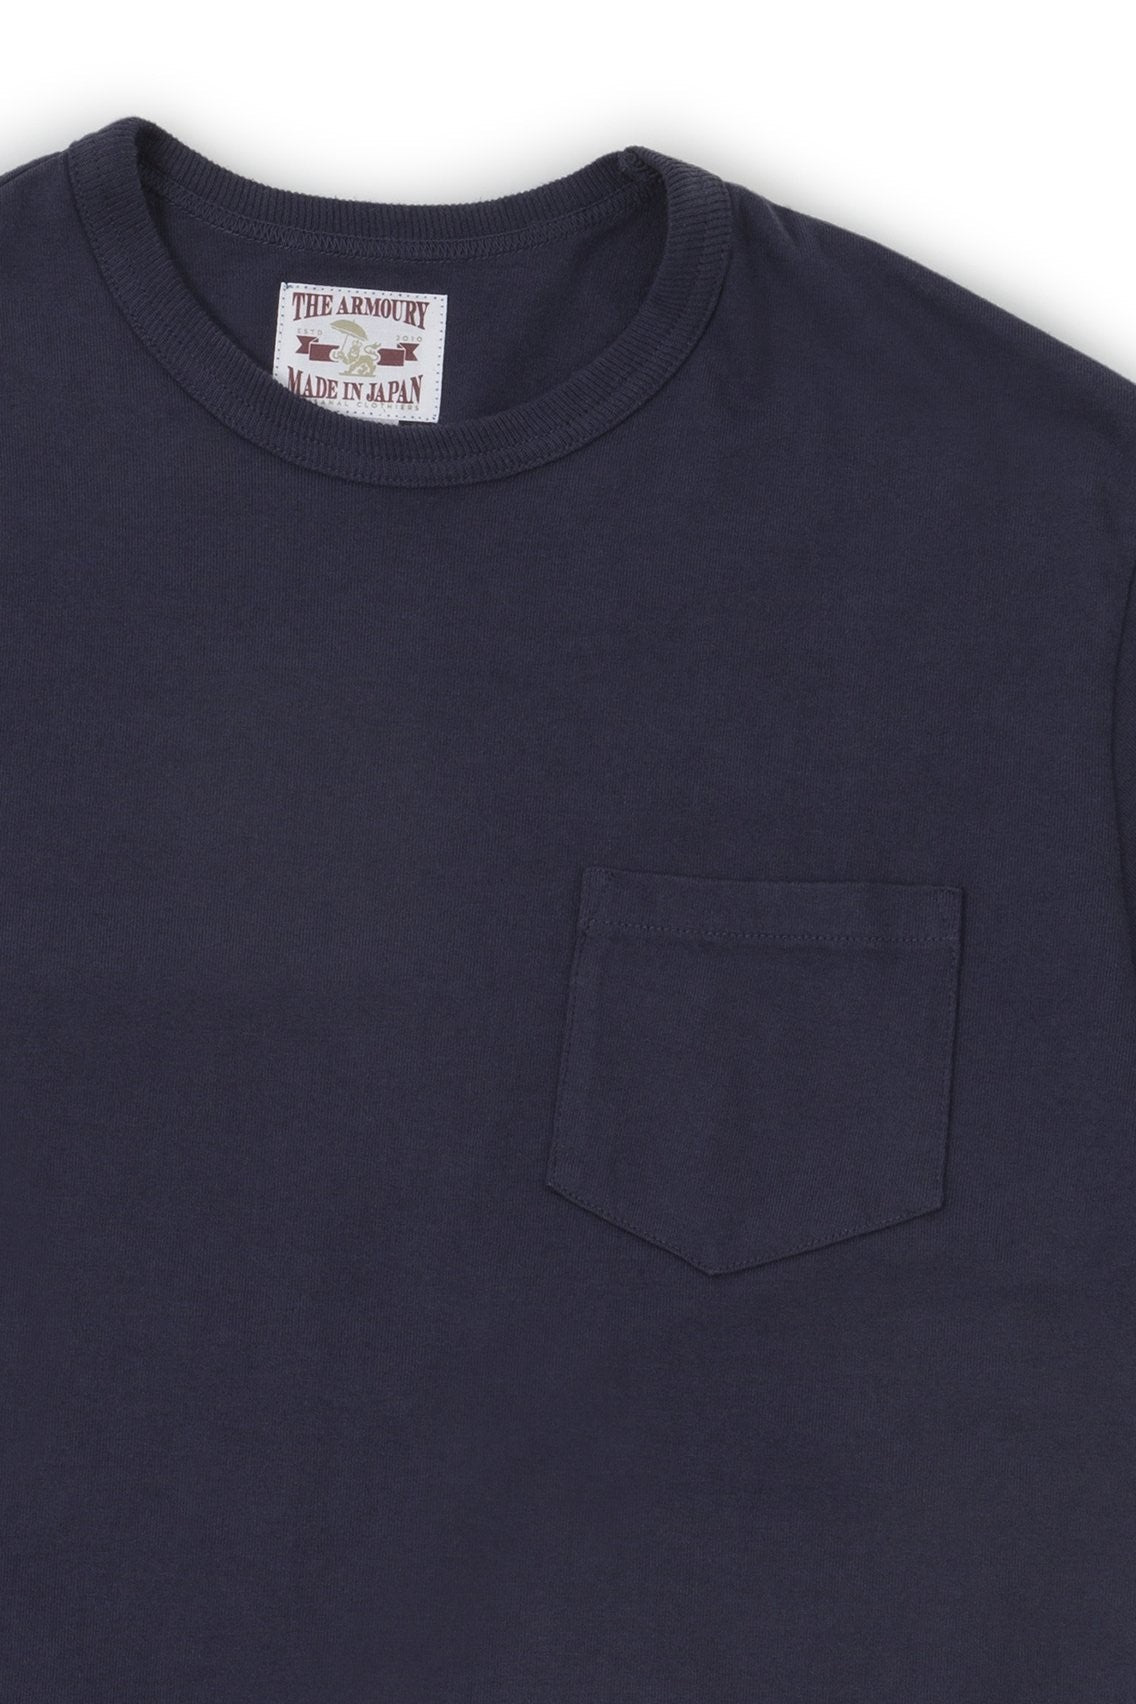 The Armoury by The Real McCoy's Navy Cotton Pocket Tee